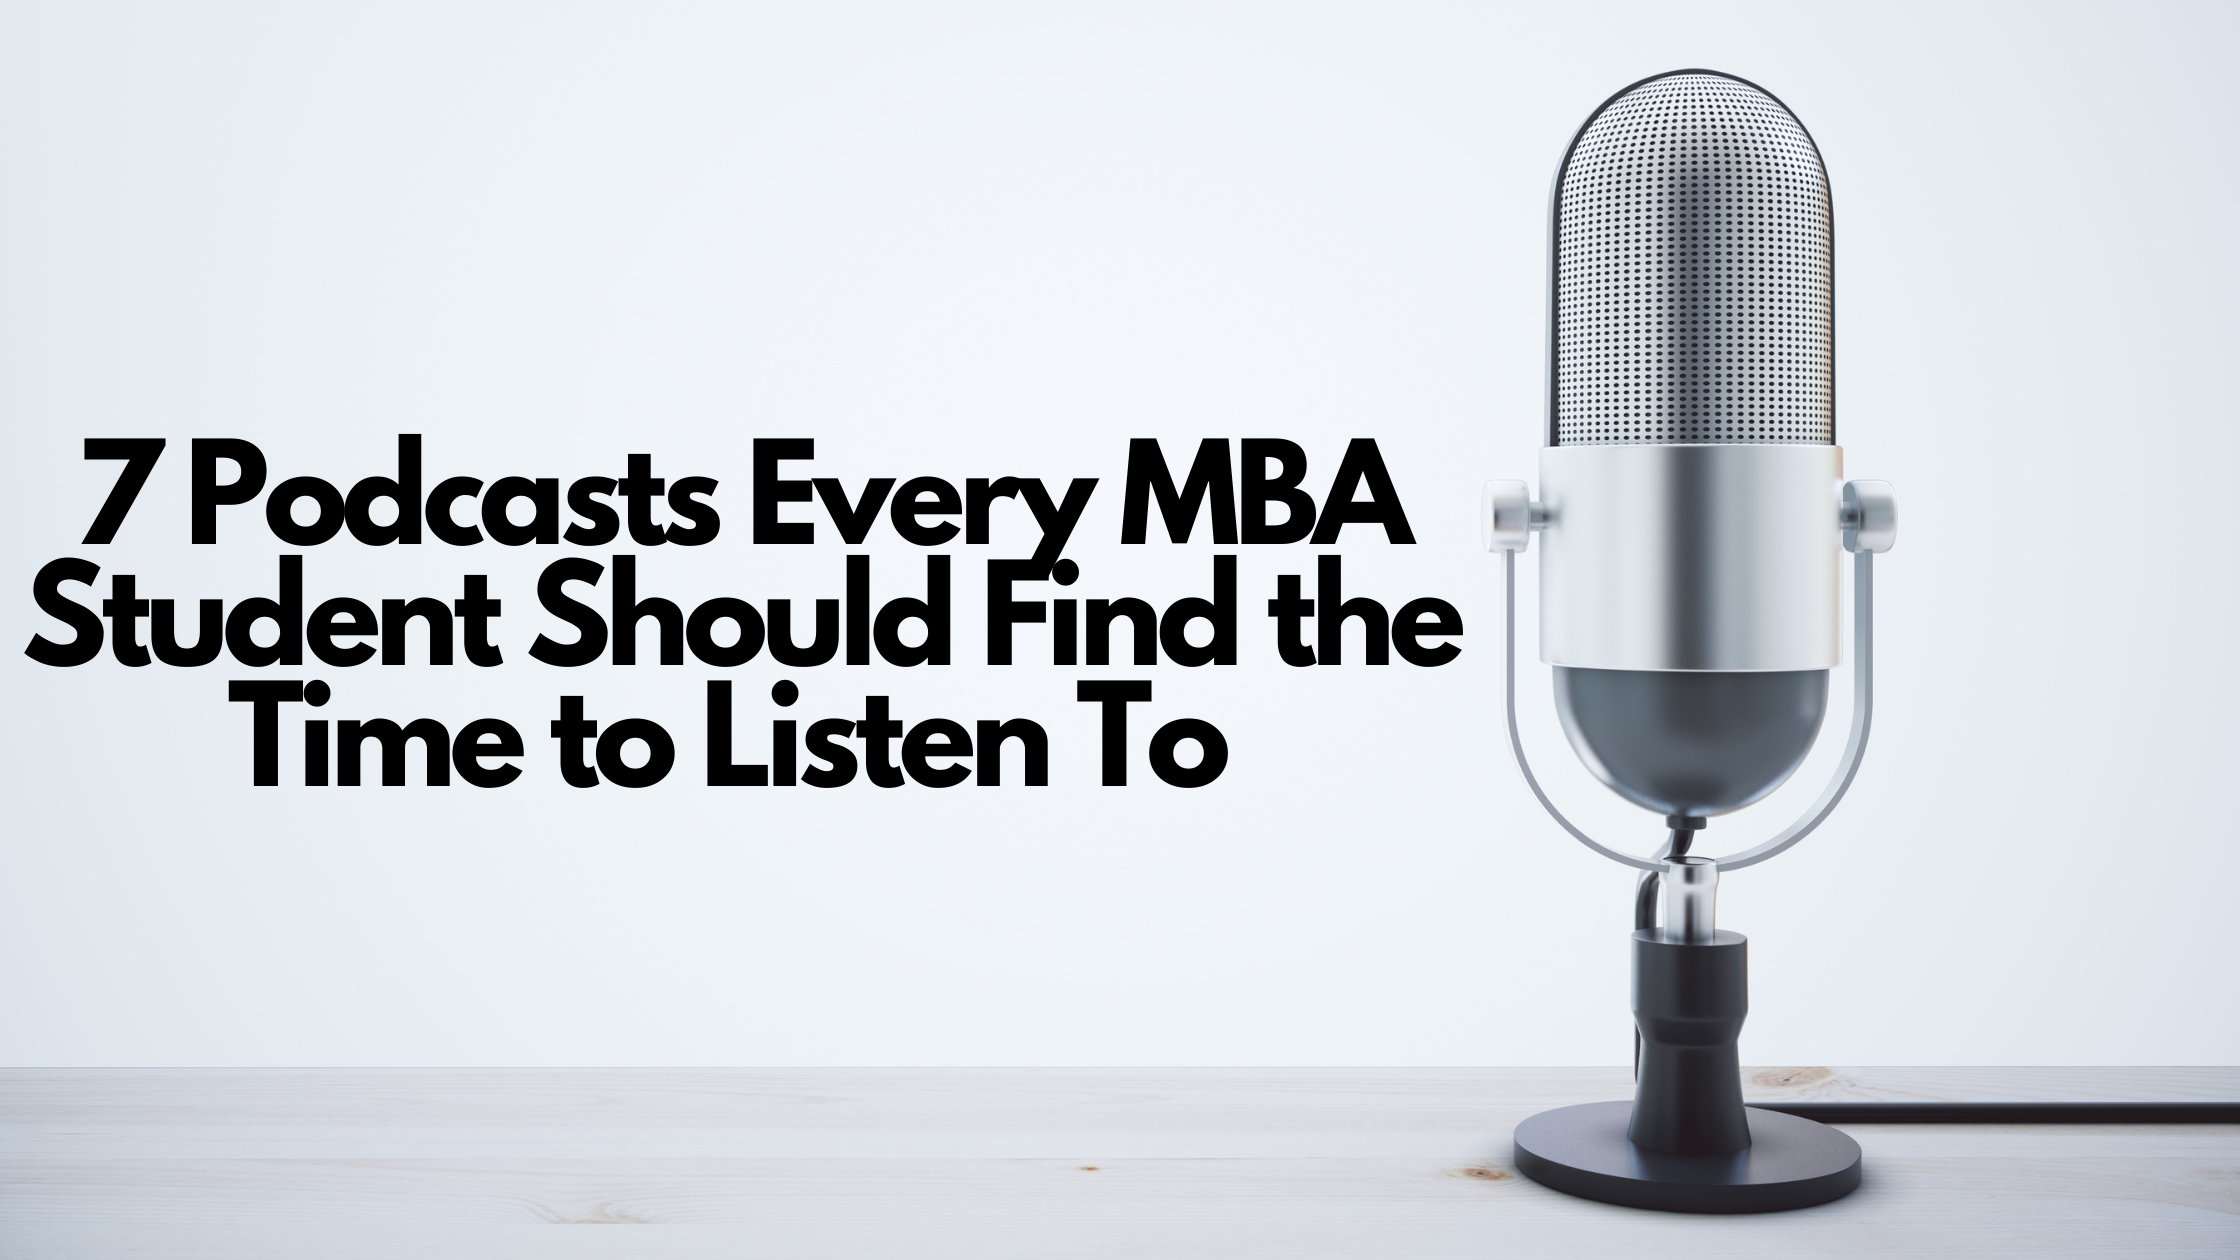 Image of 7 Podcasts Every MBA Student Should Find the Time to Listen To  